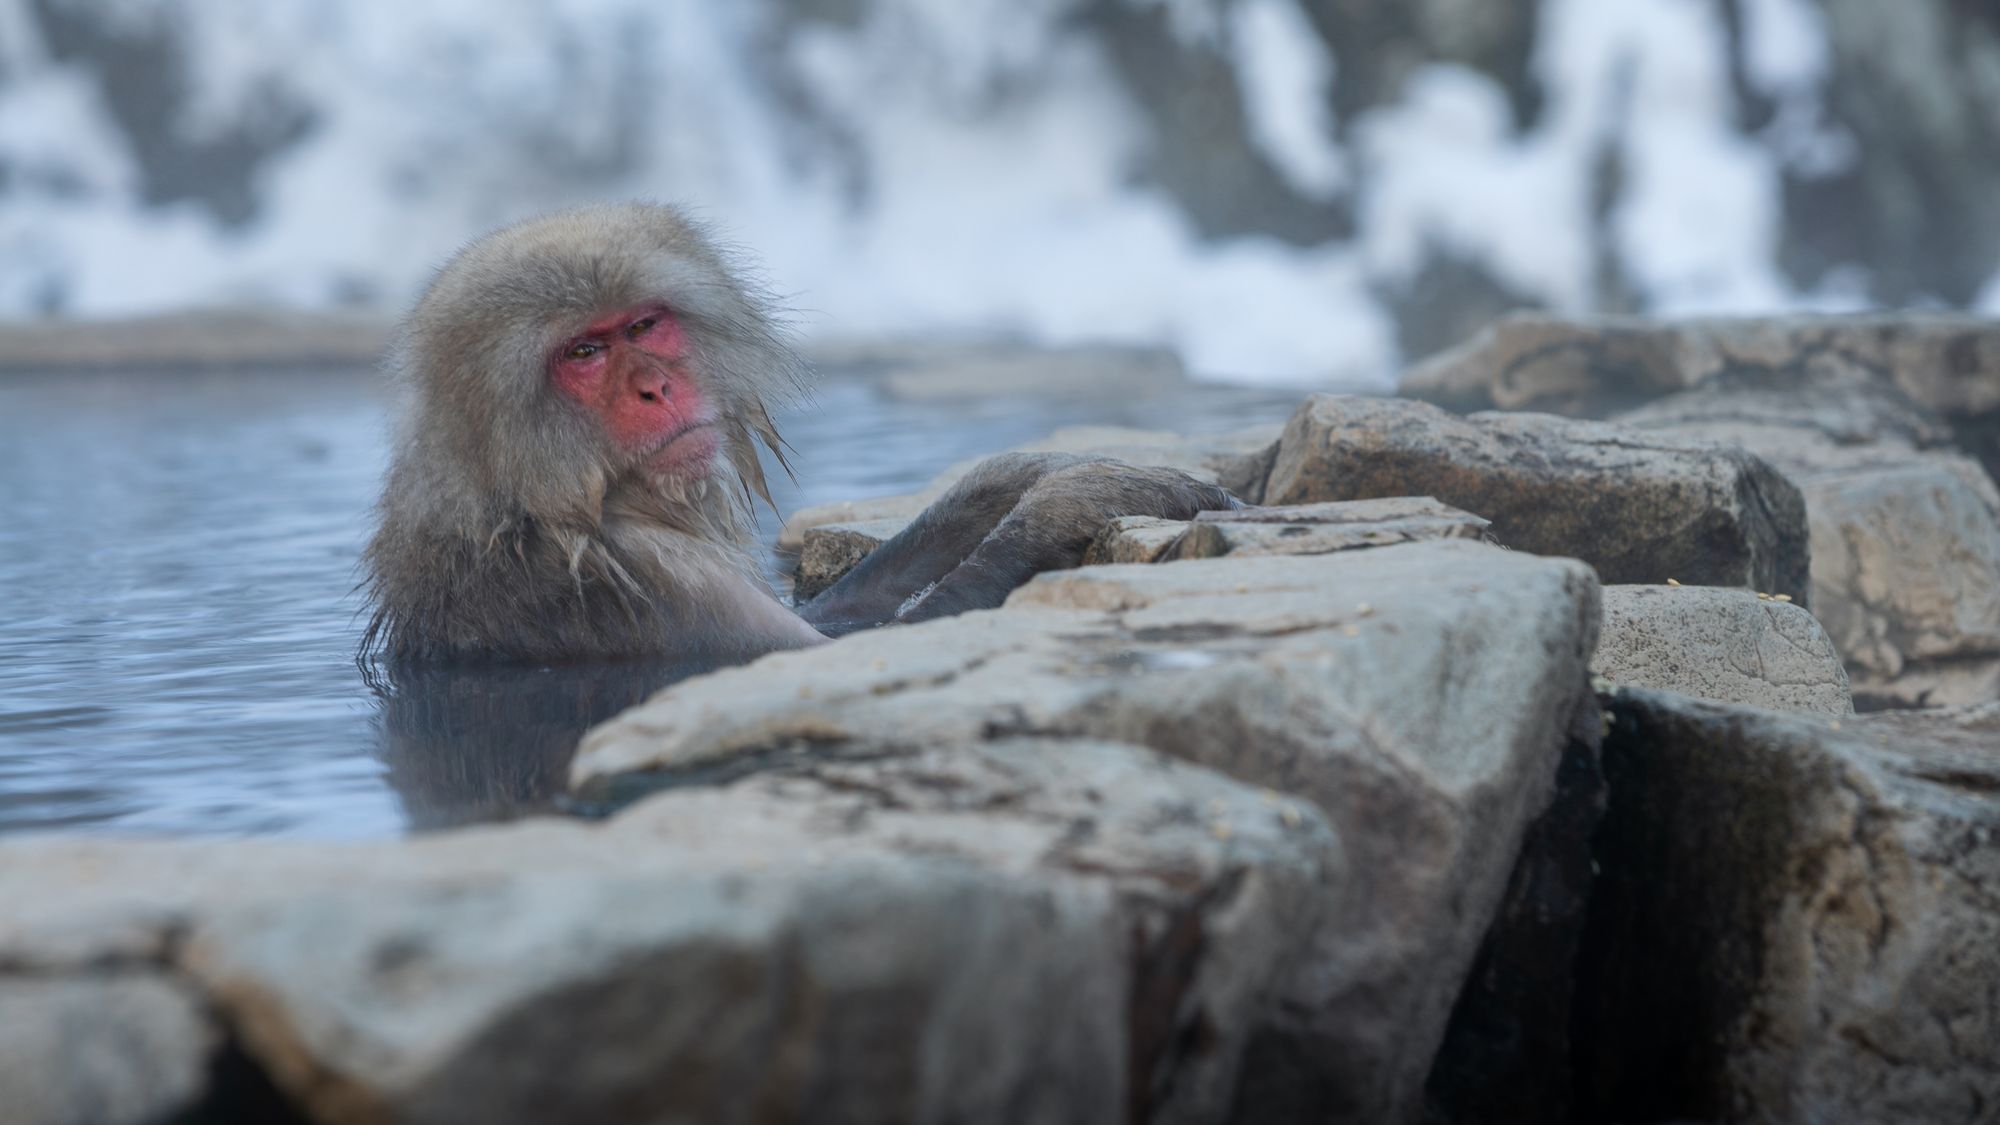 Snow monkey taking bath with hot spring water